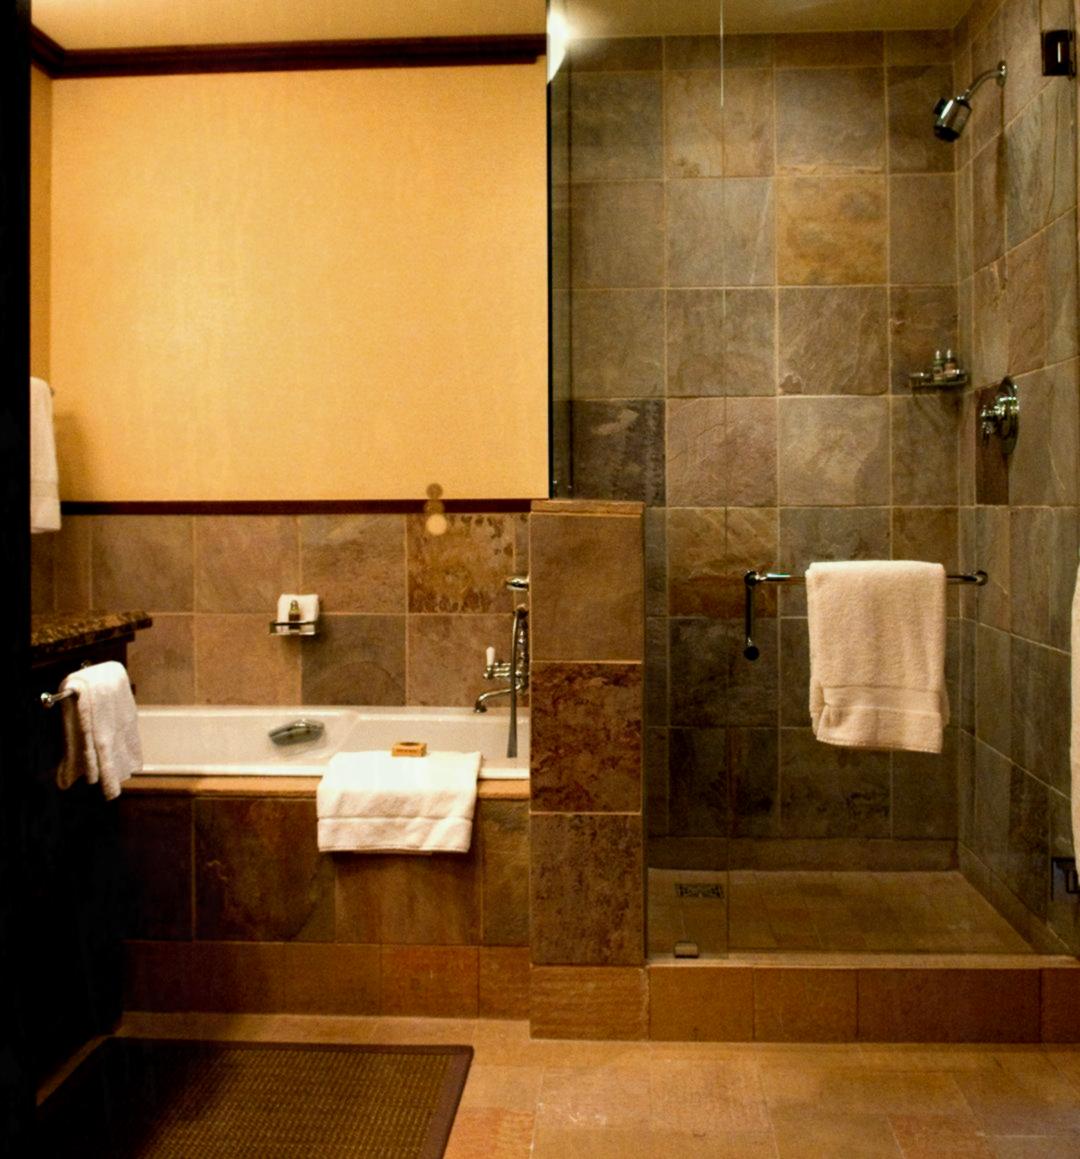 The Best Corner Shower Designs For Your Small Bathroom and